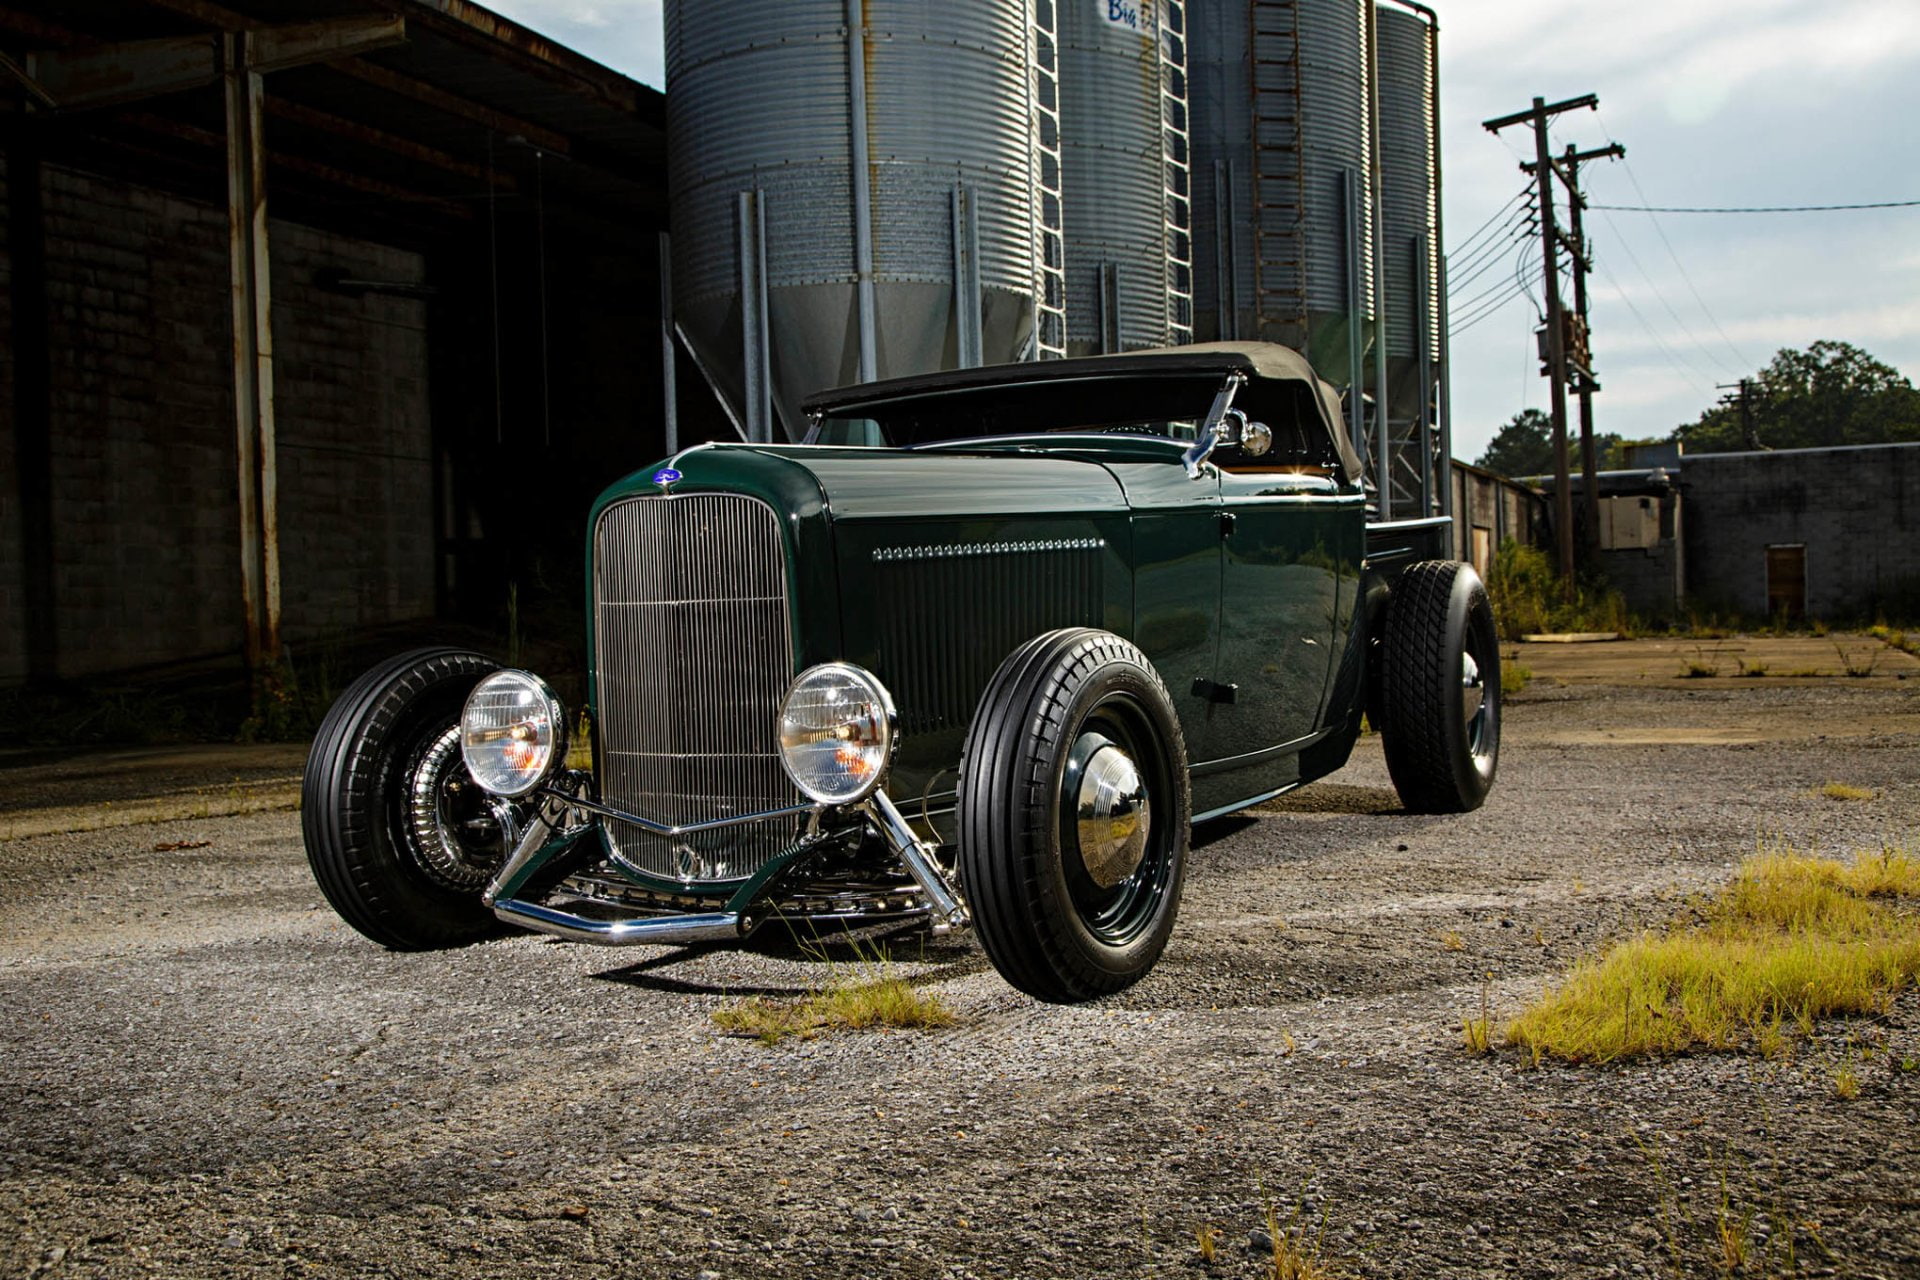 Ford, Ford Roadster, 1932 Ford Roadster, Hot Rod, Pickup, Truck